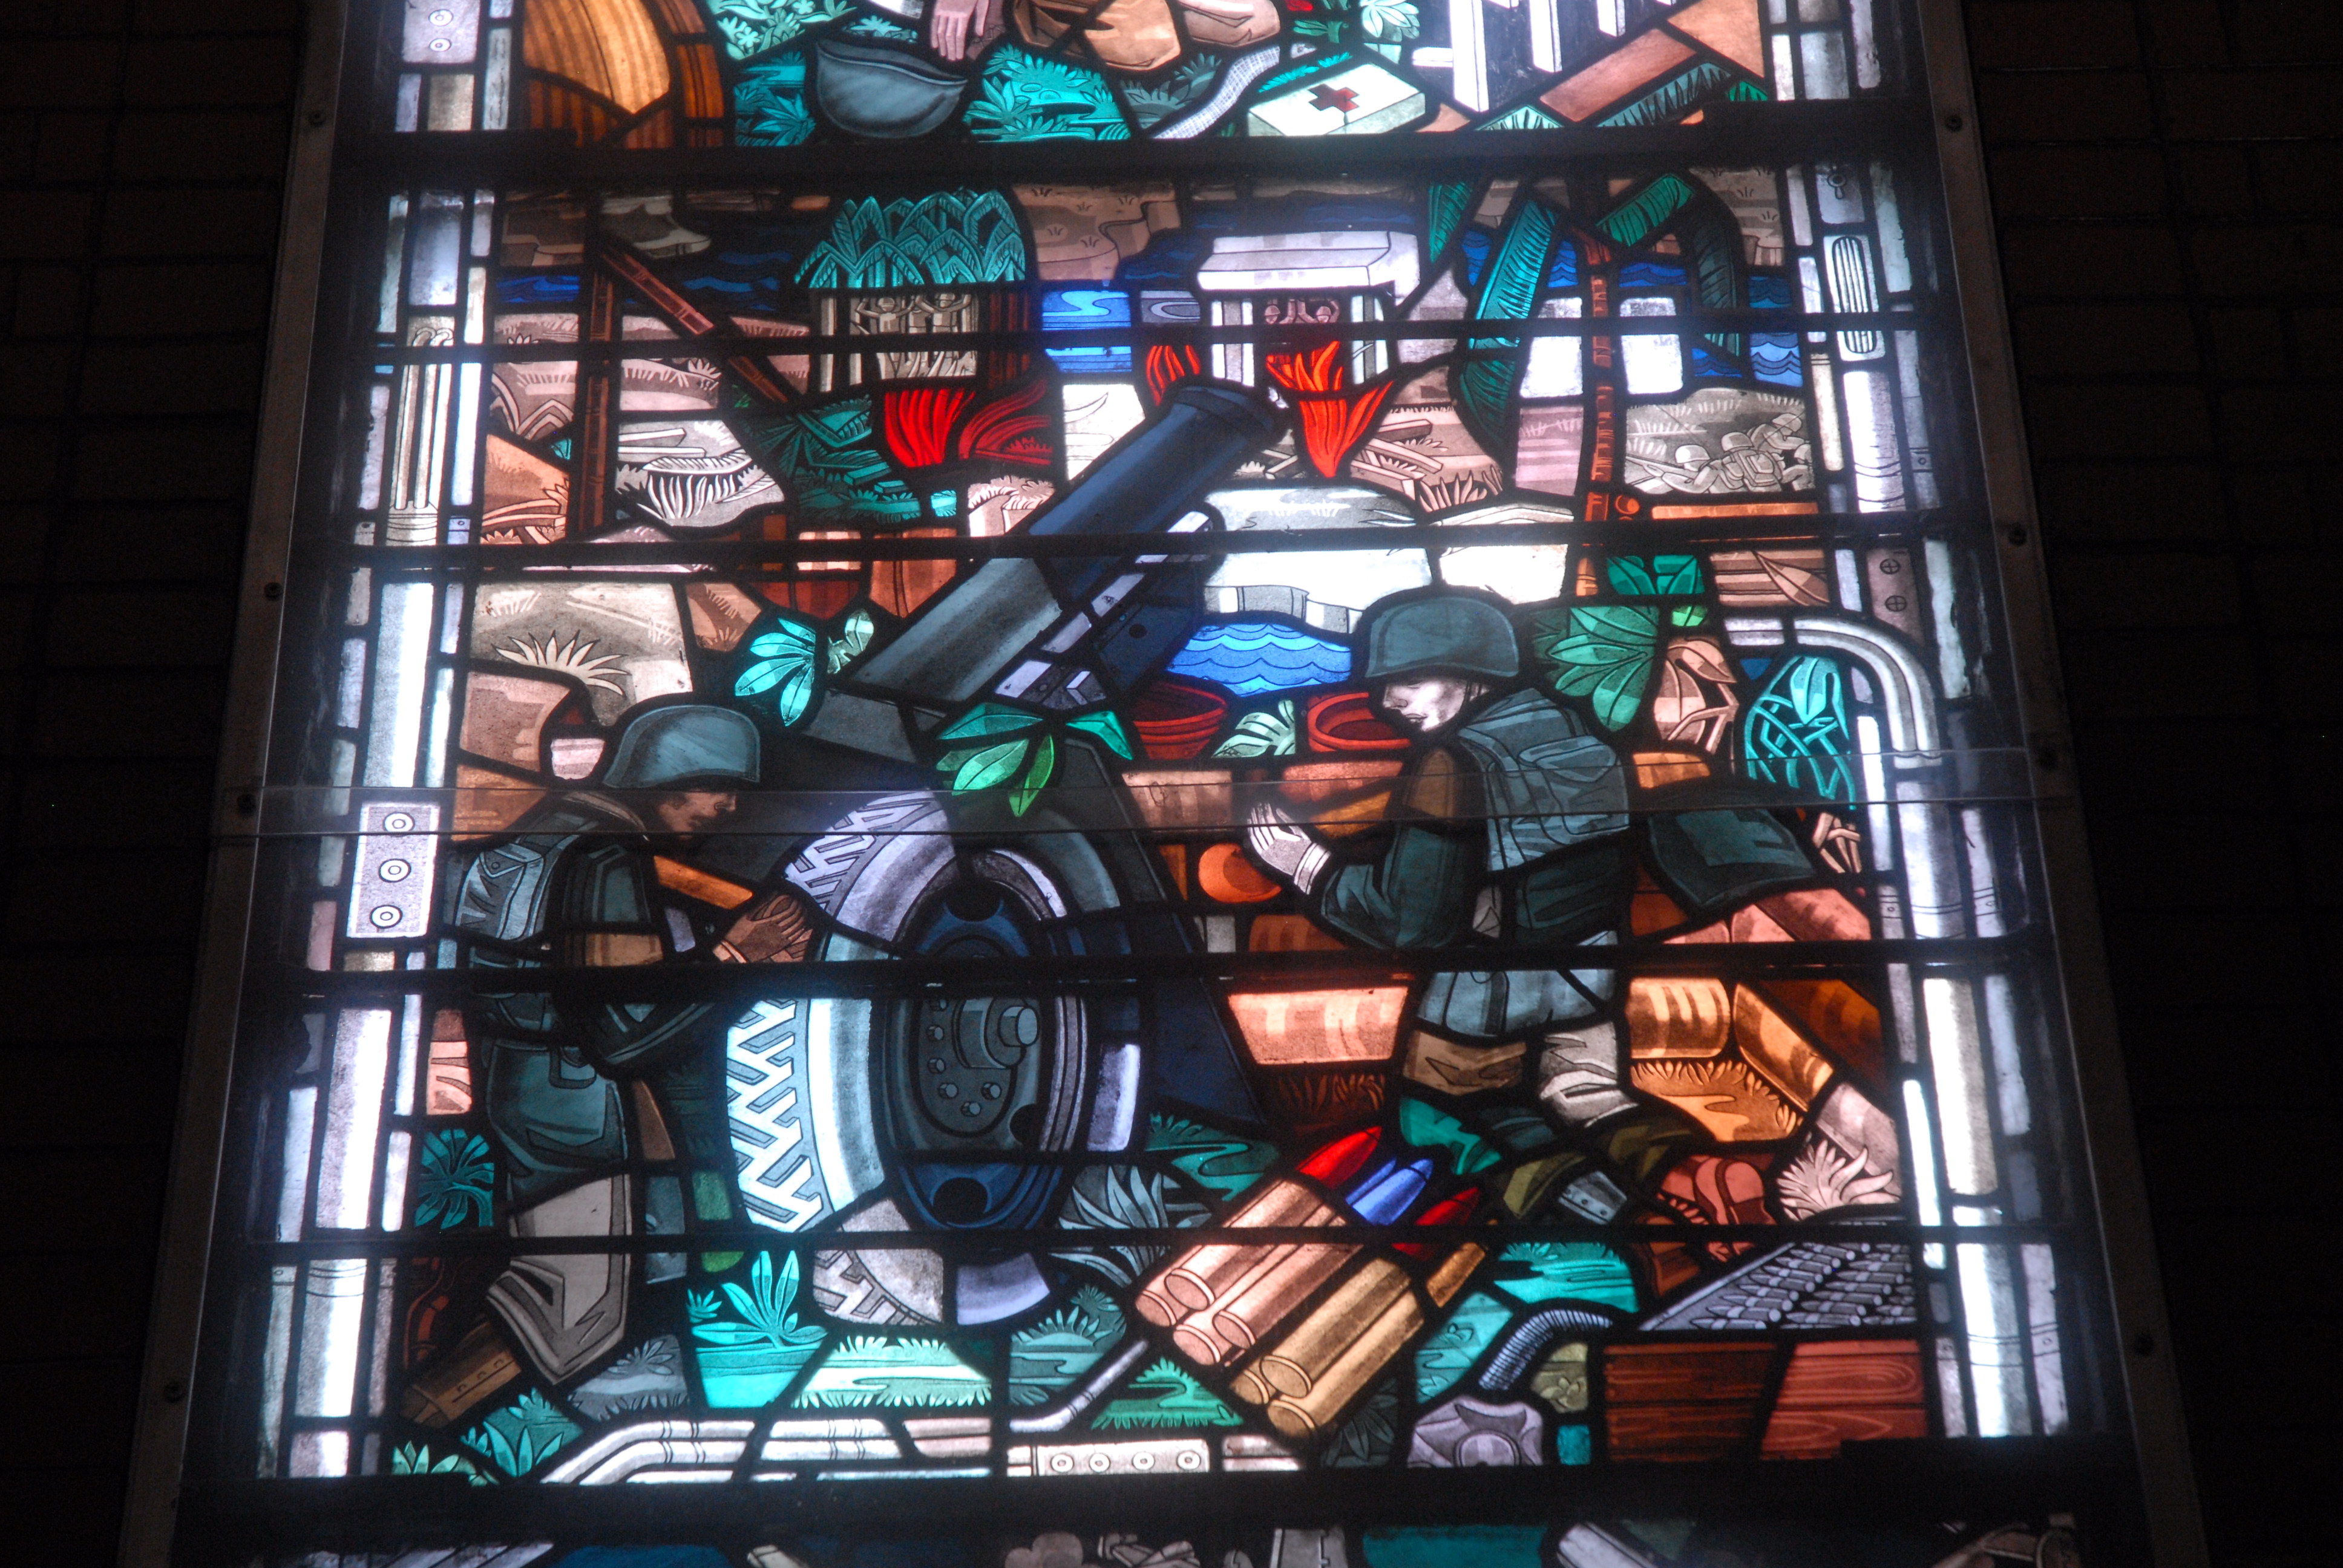 Section of the World War II window created by Robert and Gertrude Metcalf.